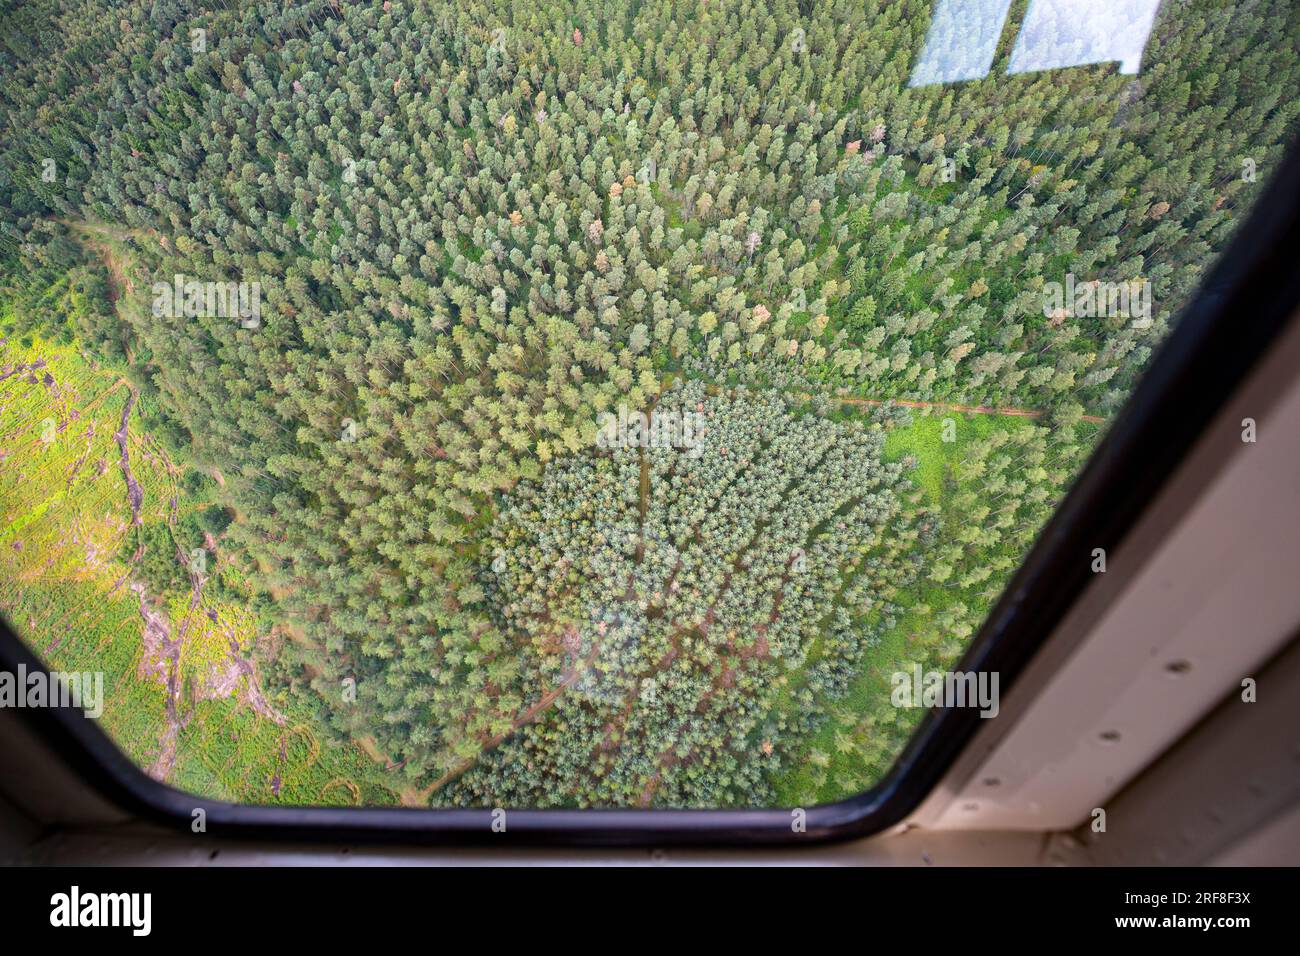 Top view of pine trees from a helicopter window. Stock Photo